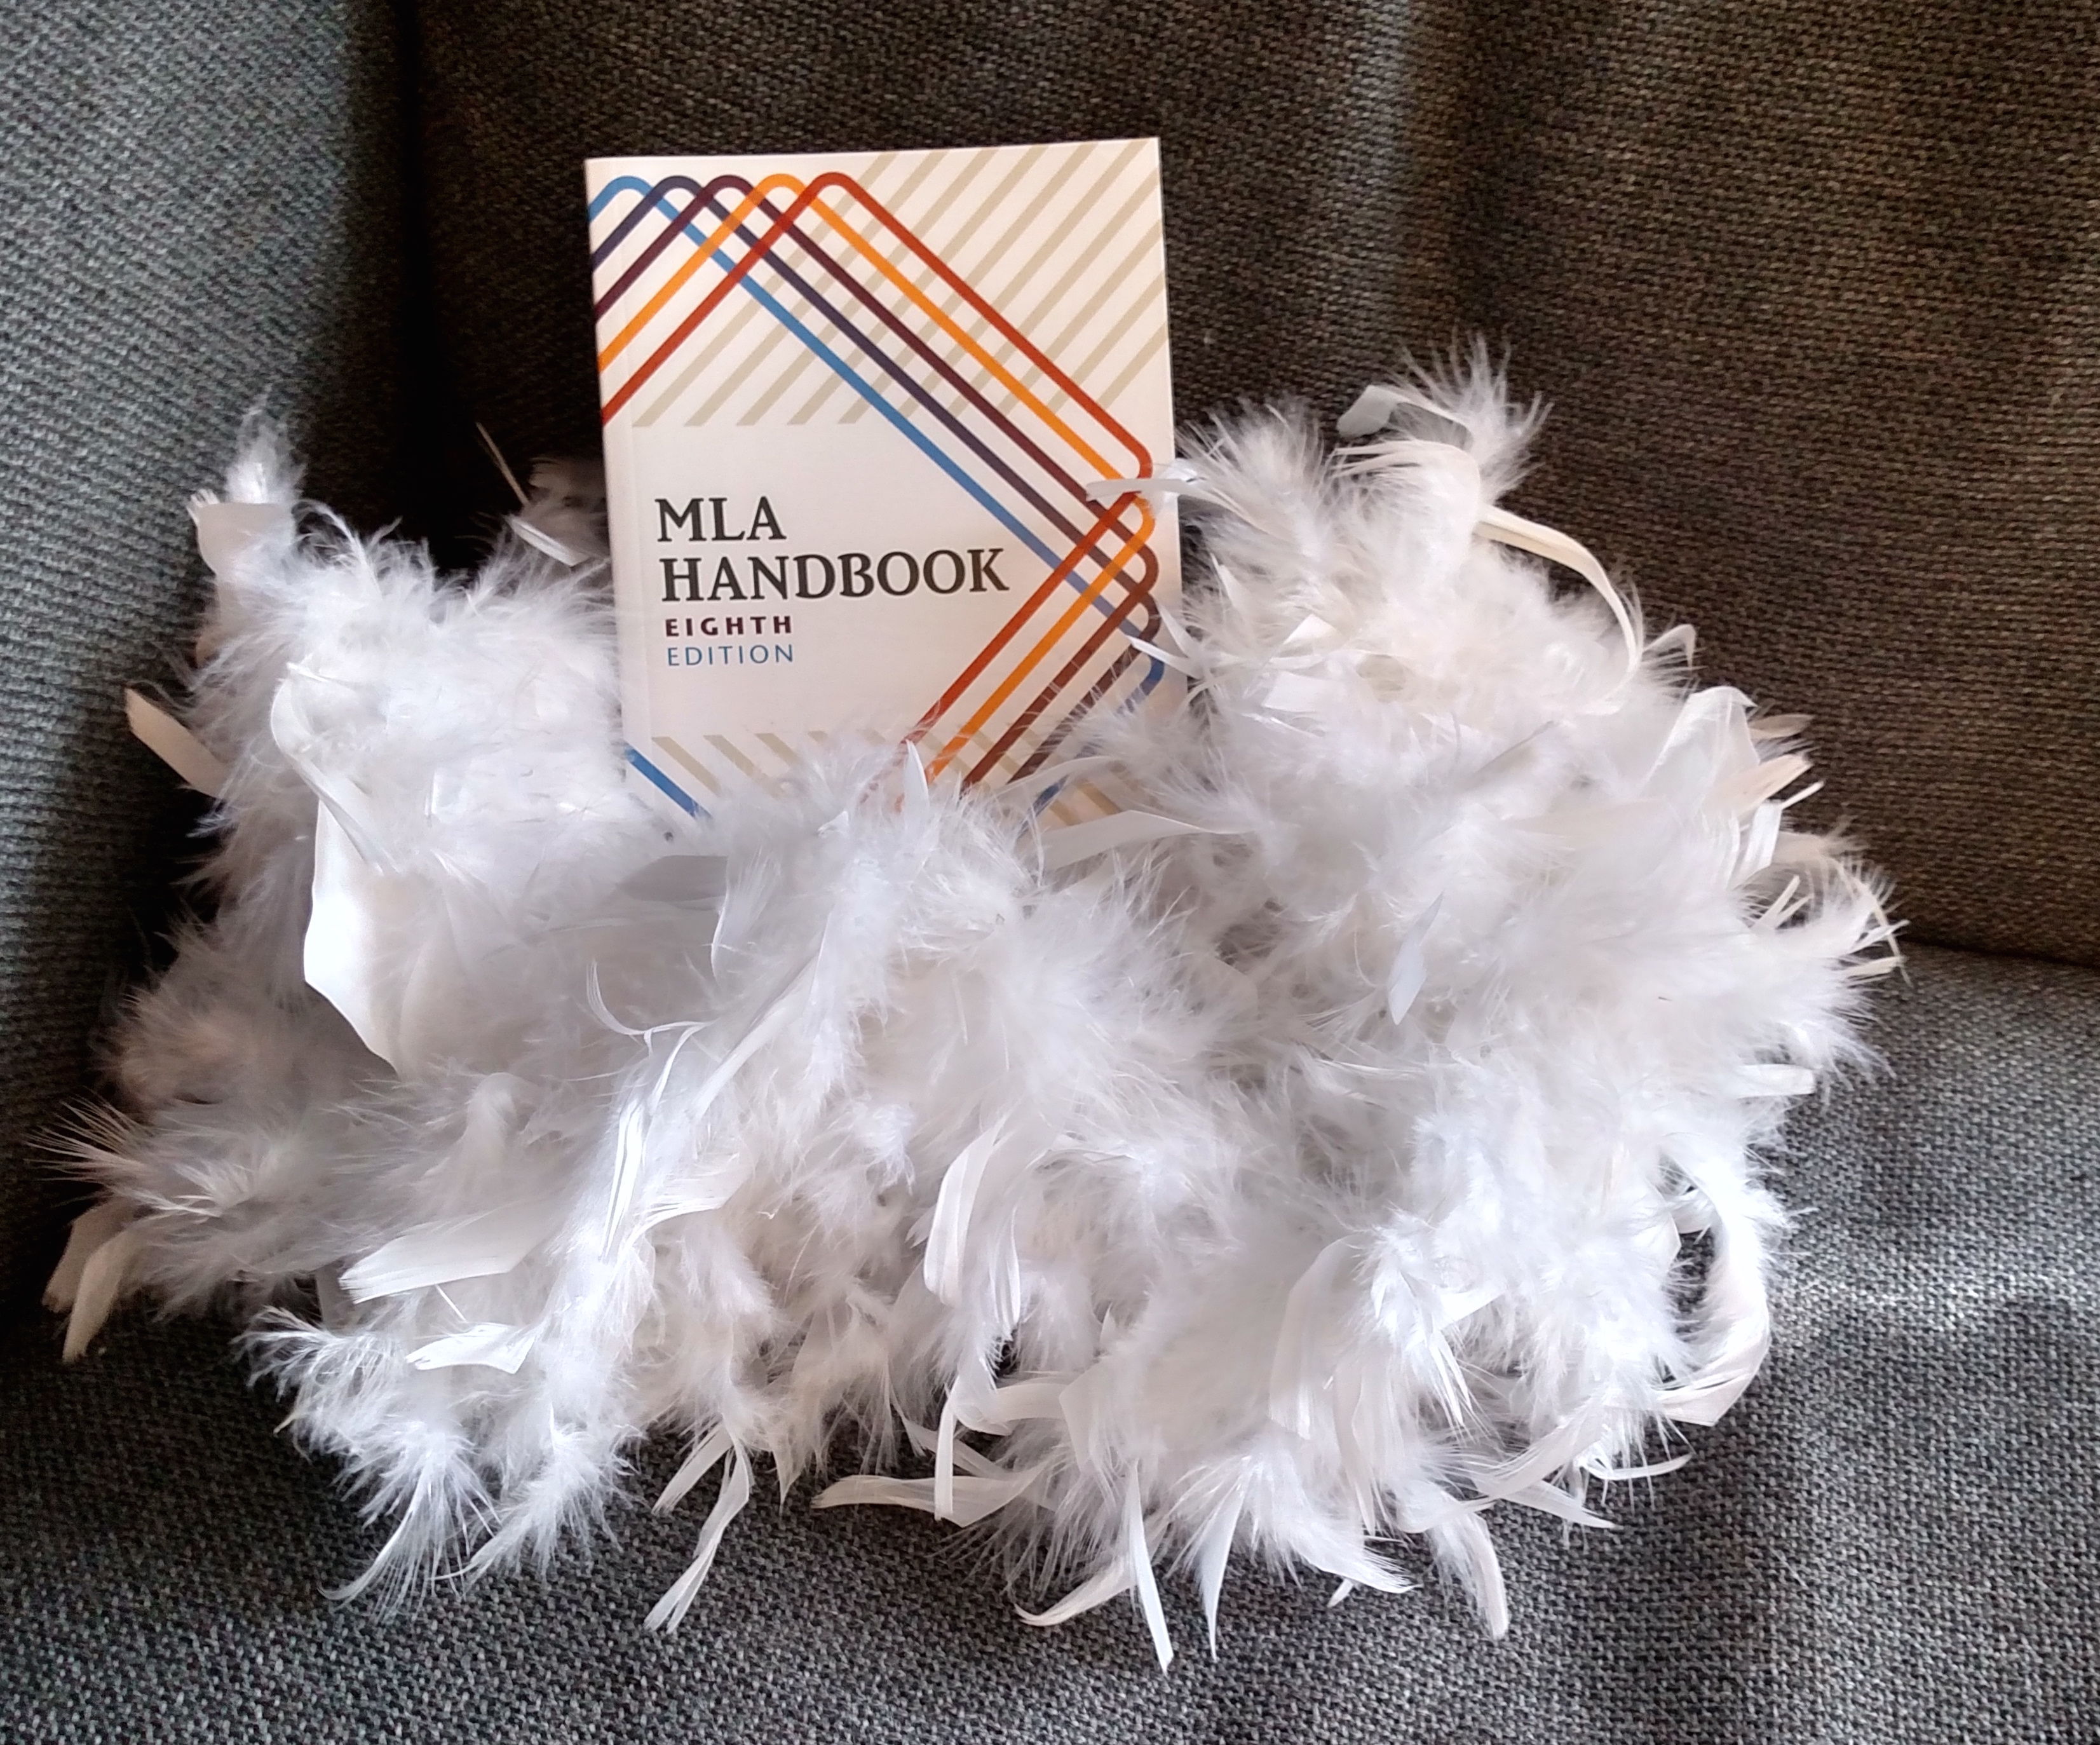 MLA Handbook 8th edition propped on a sofa, wrapped in a white feather boa